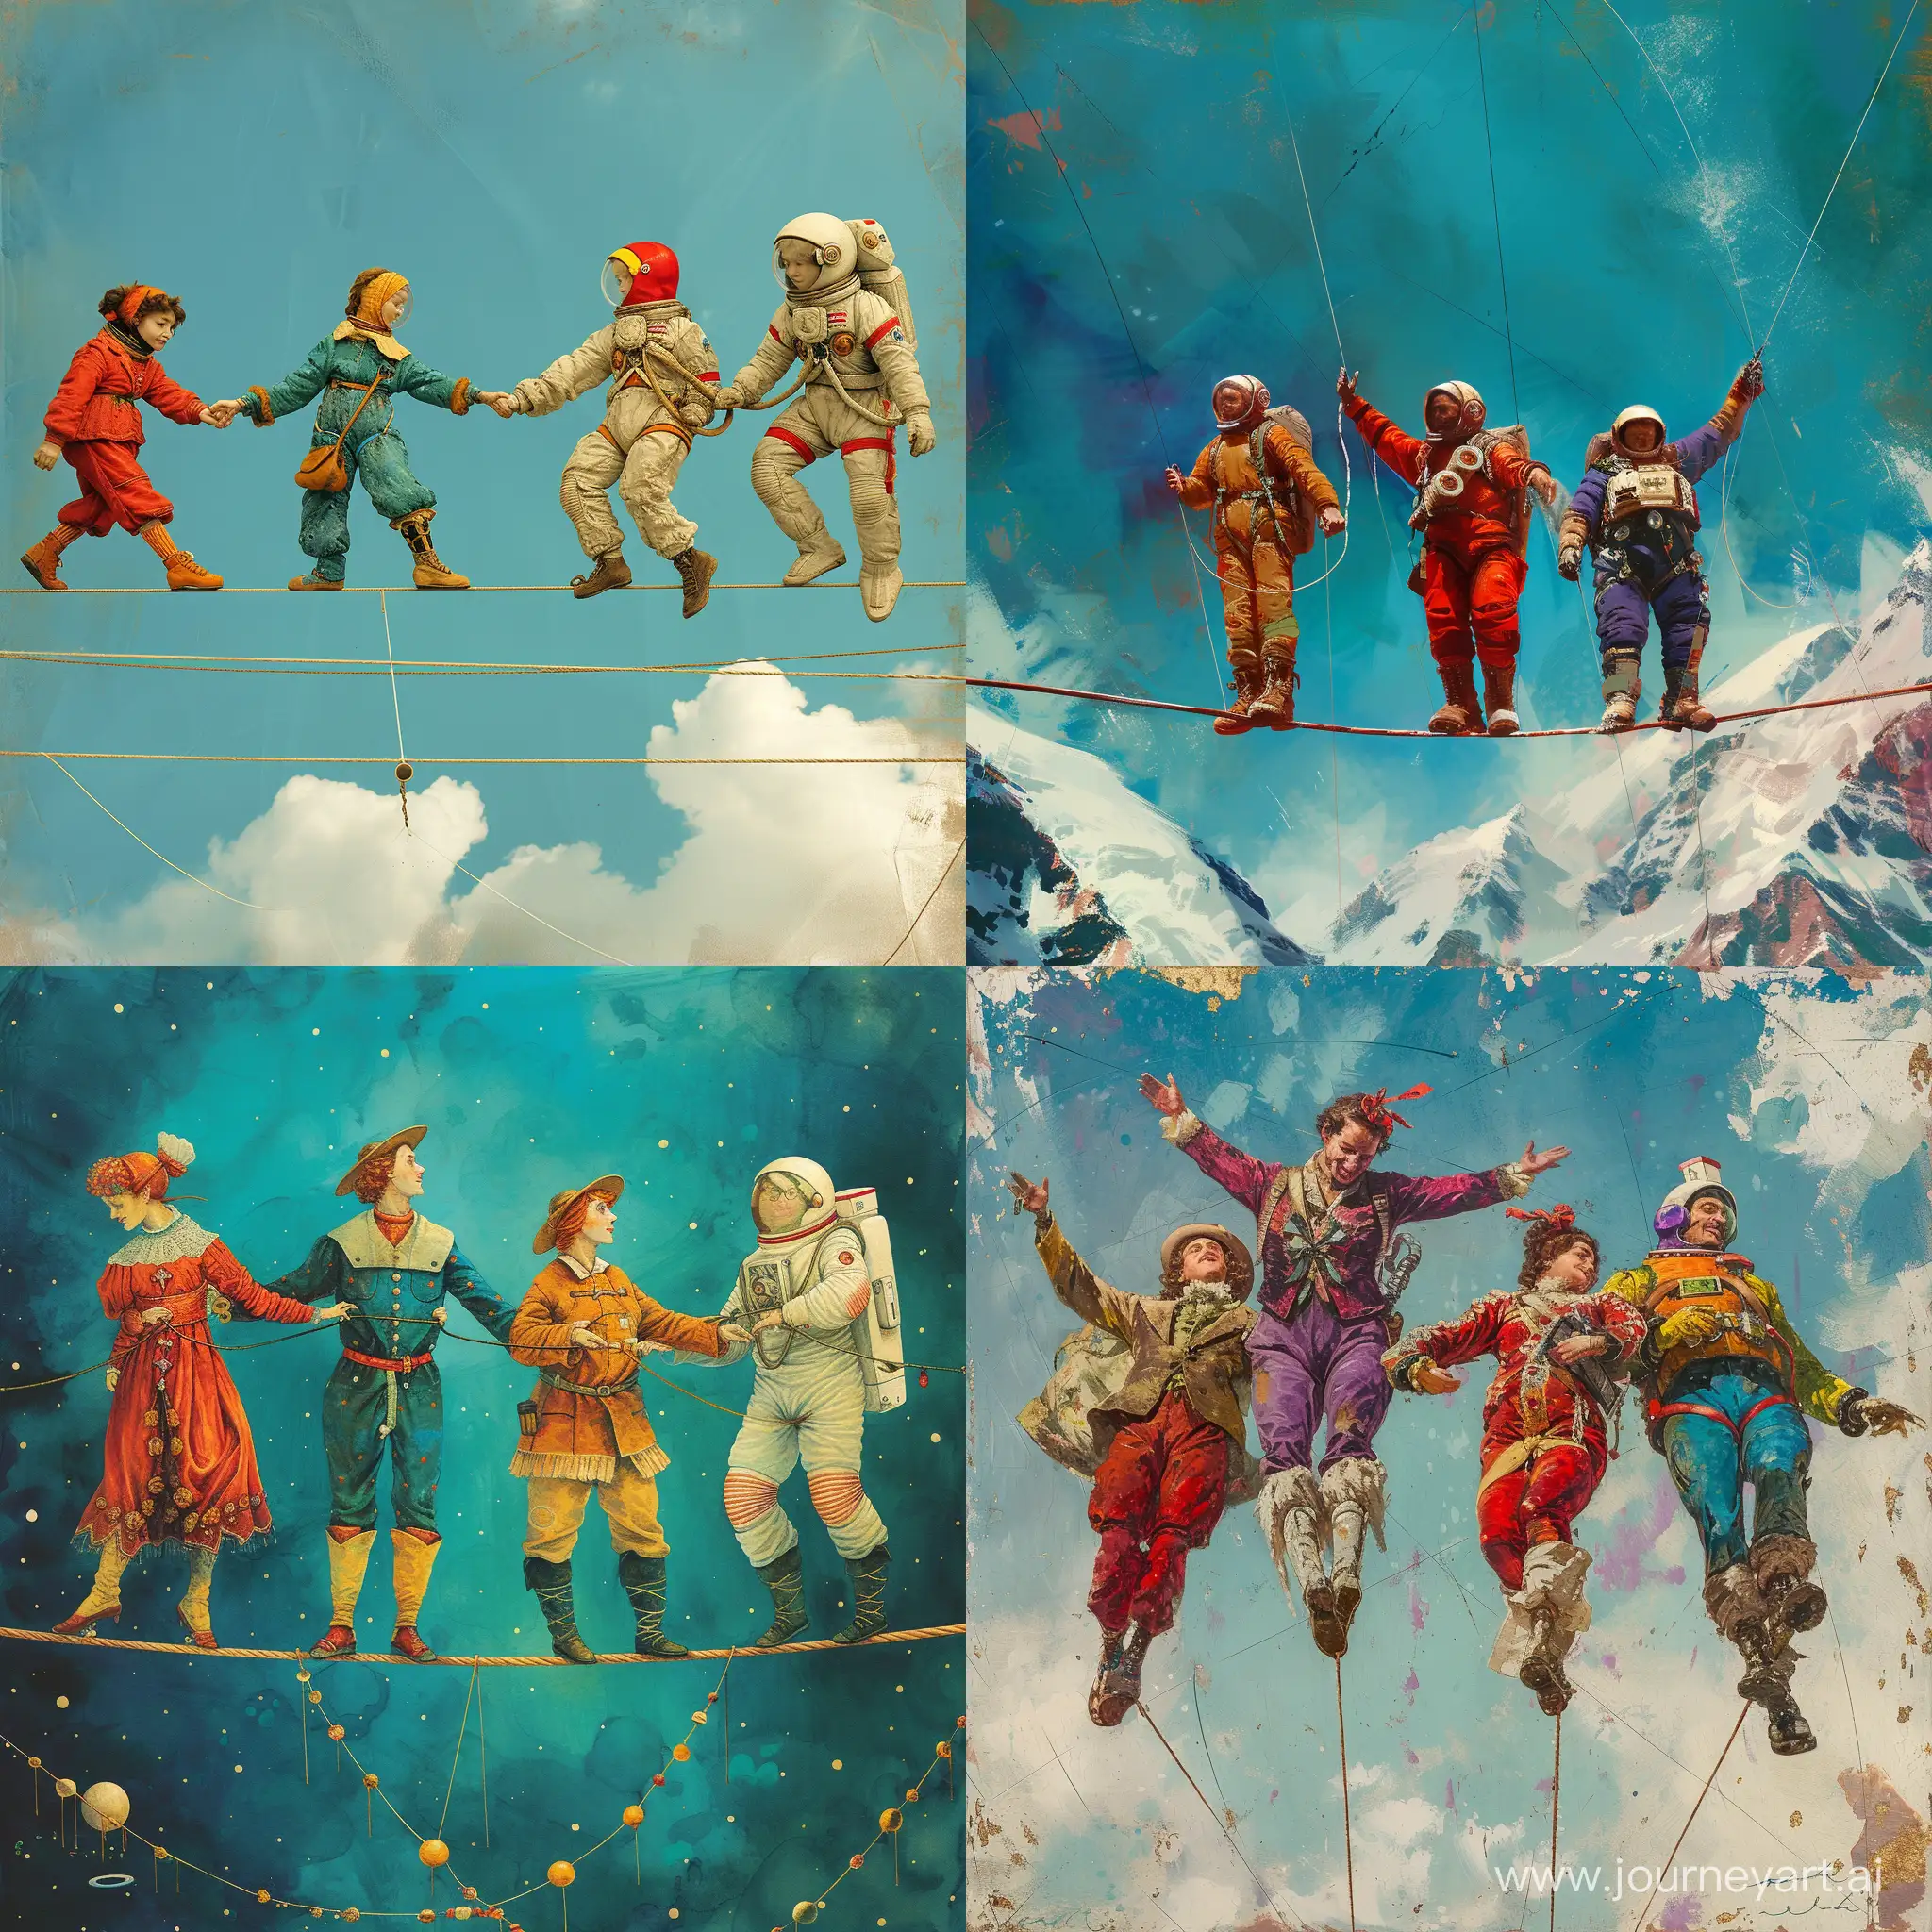 Joyful-Equilibrists-and-Cosmonaut-in-a-Vibrant-Tightrope-Performance